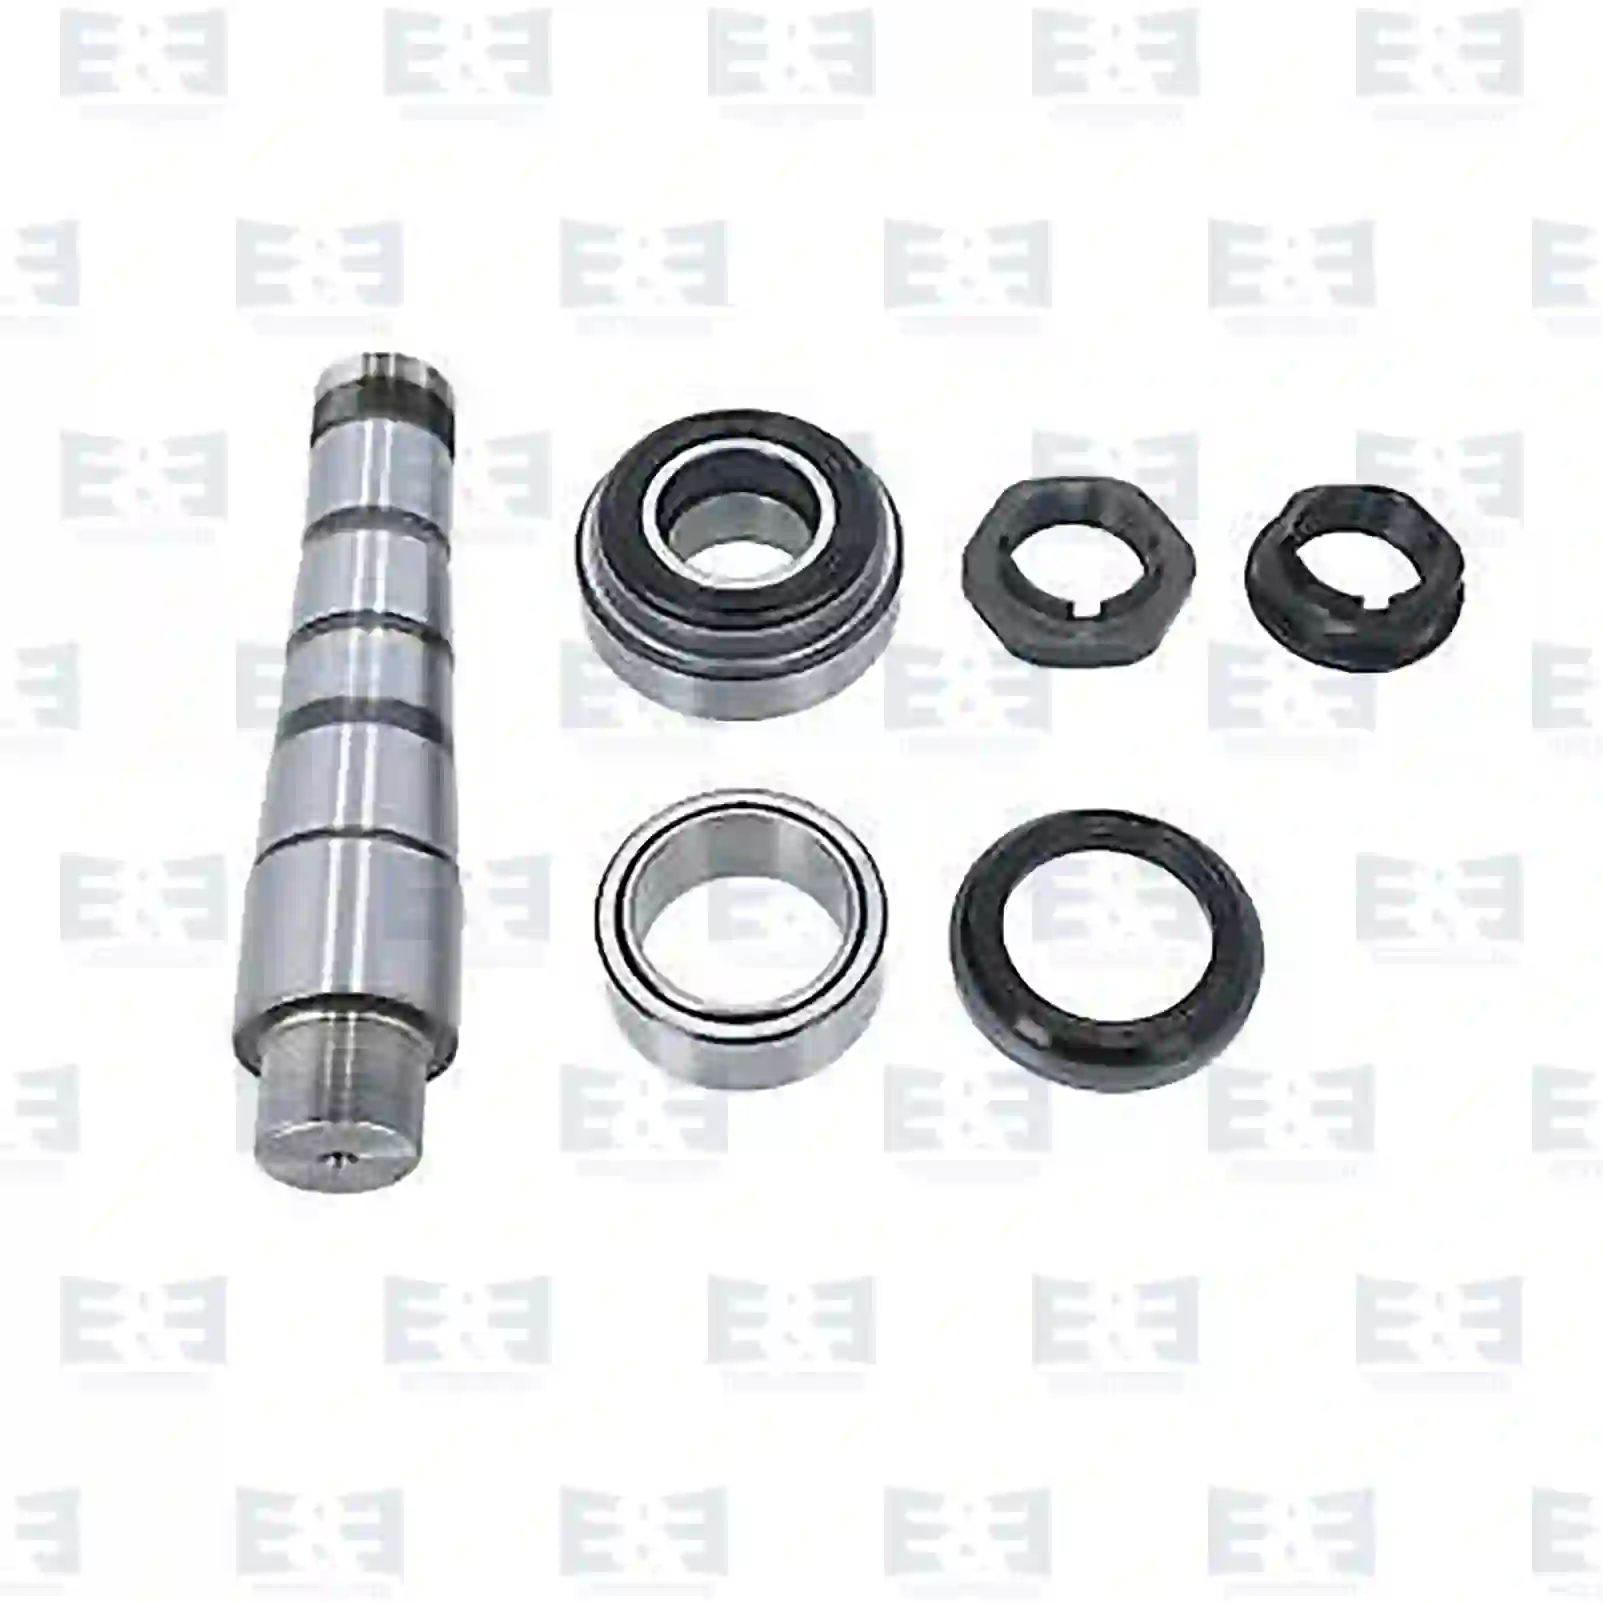  King pin kit, with bearing || E&E Truck Spare Parts | Truck Spare Parts, Auotomotive Spare Parts